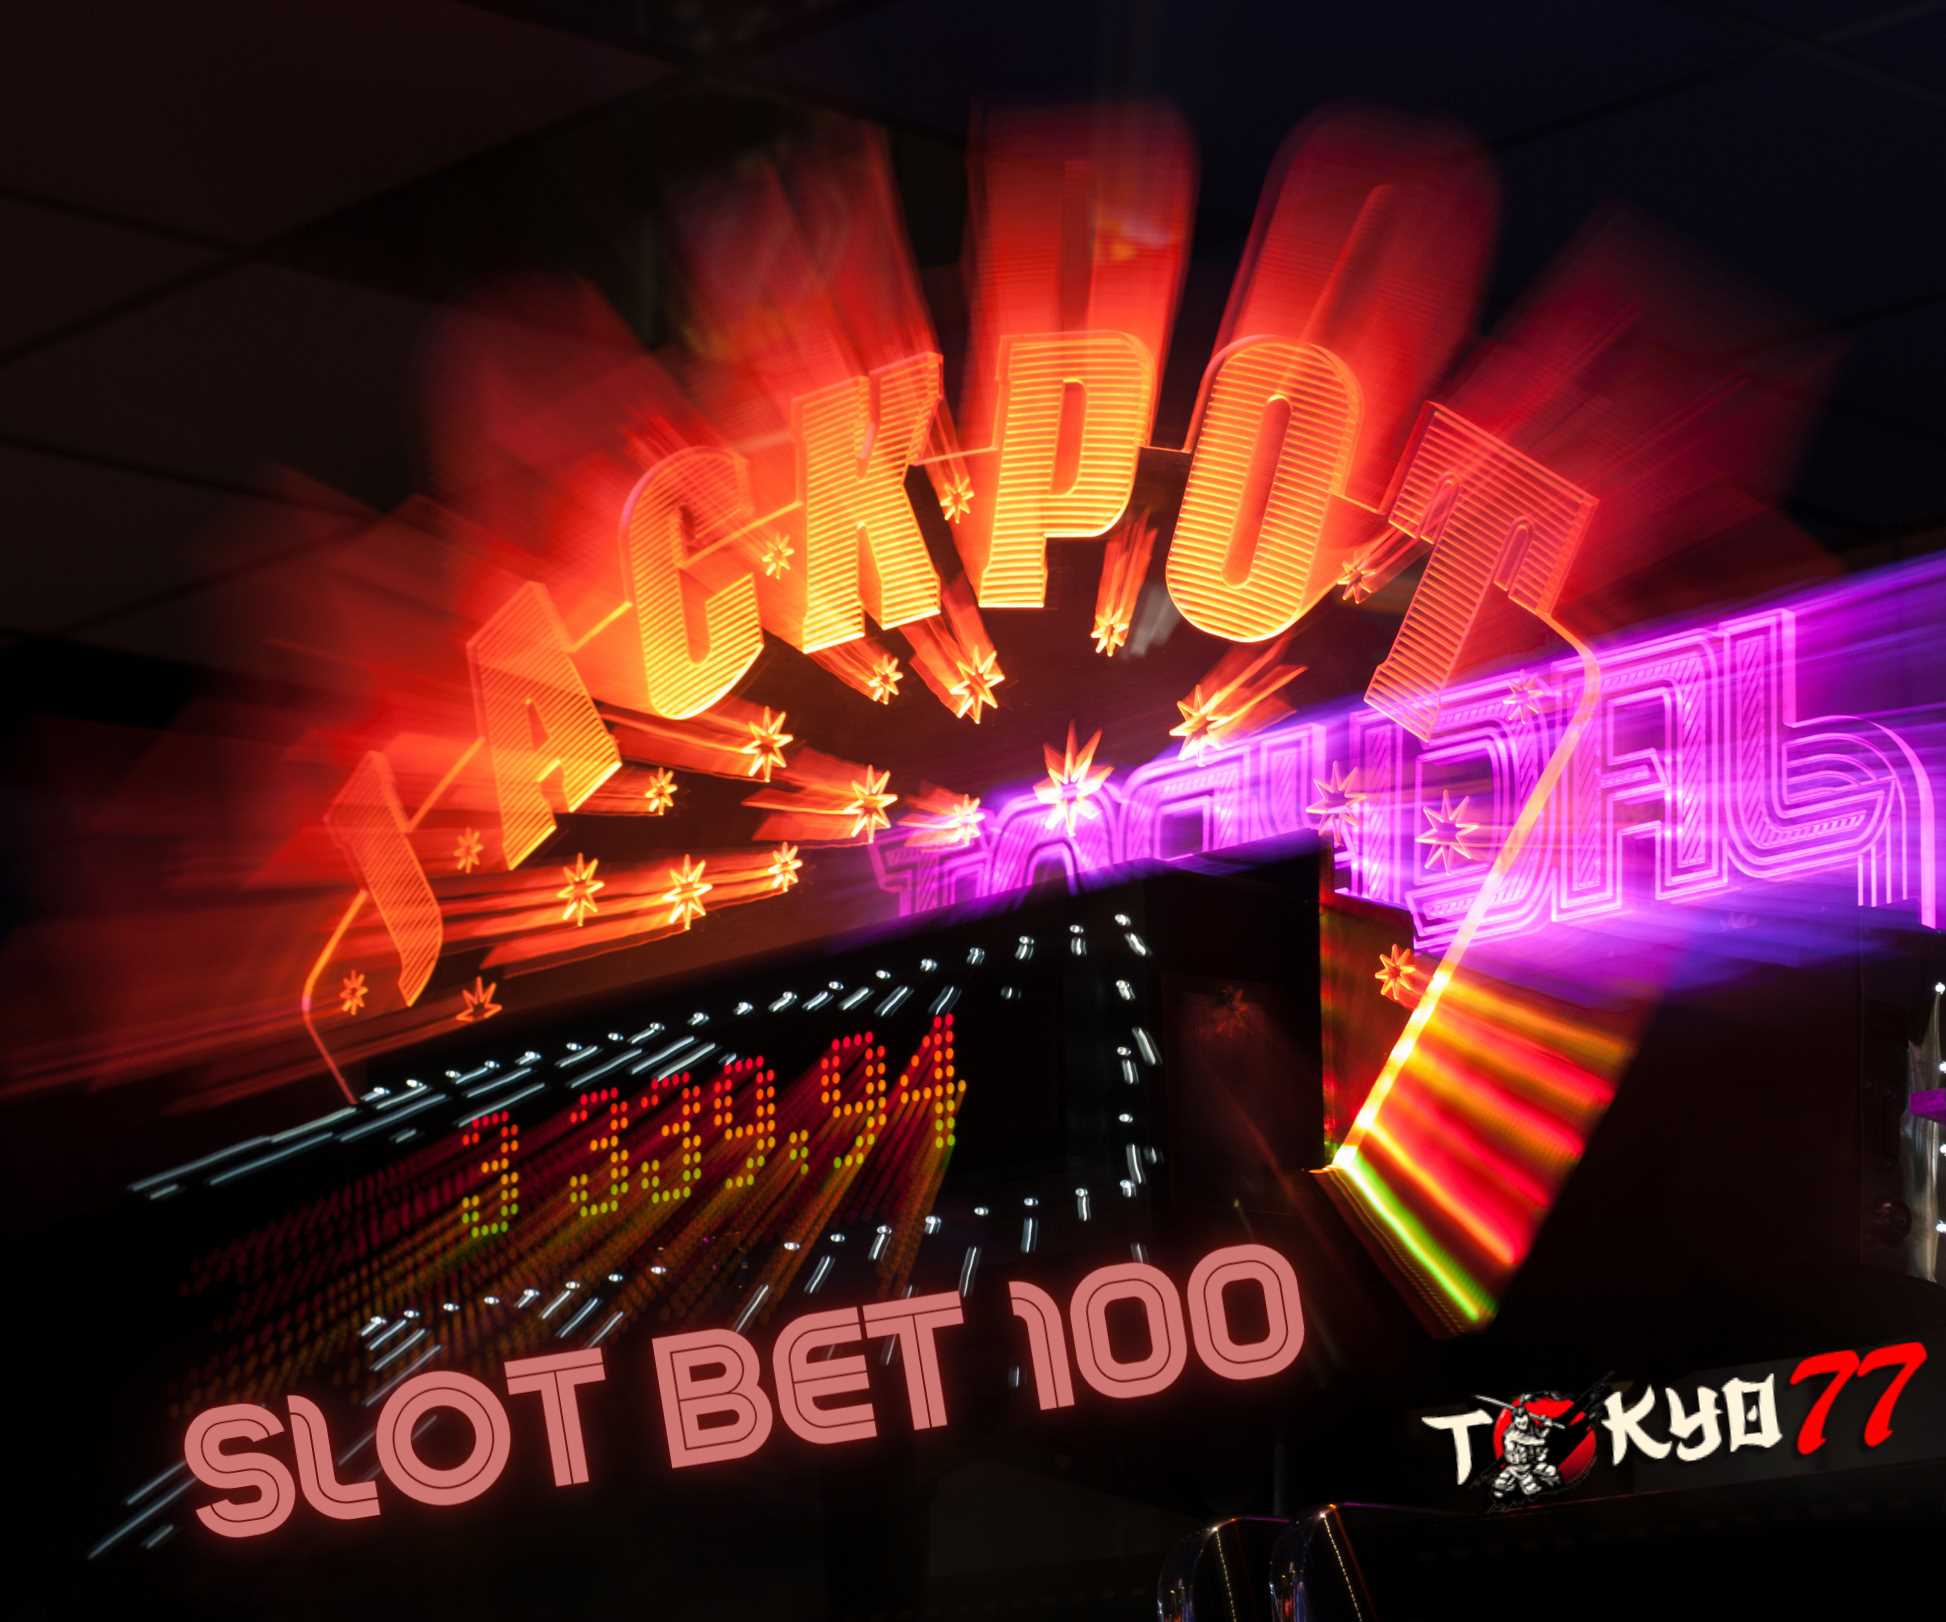 Slot Bet 100: The Fun of Playing Slots with Low Bets